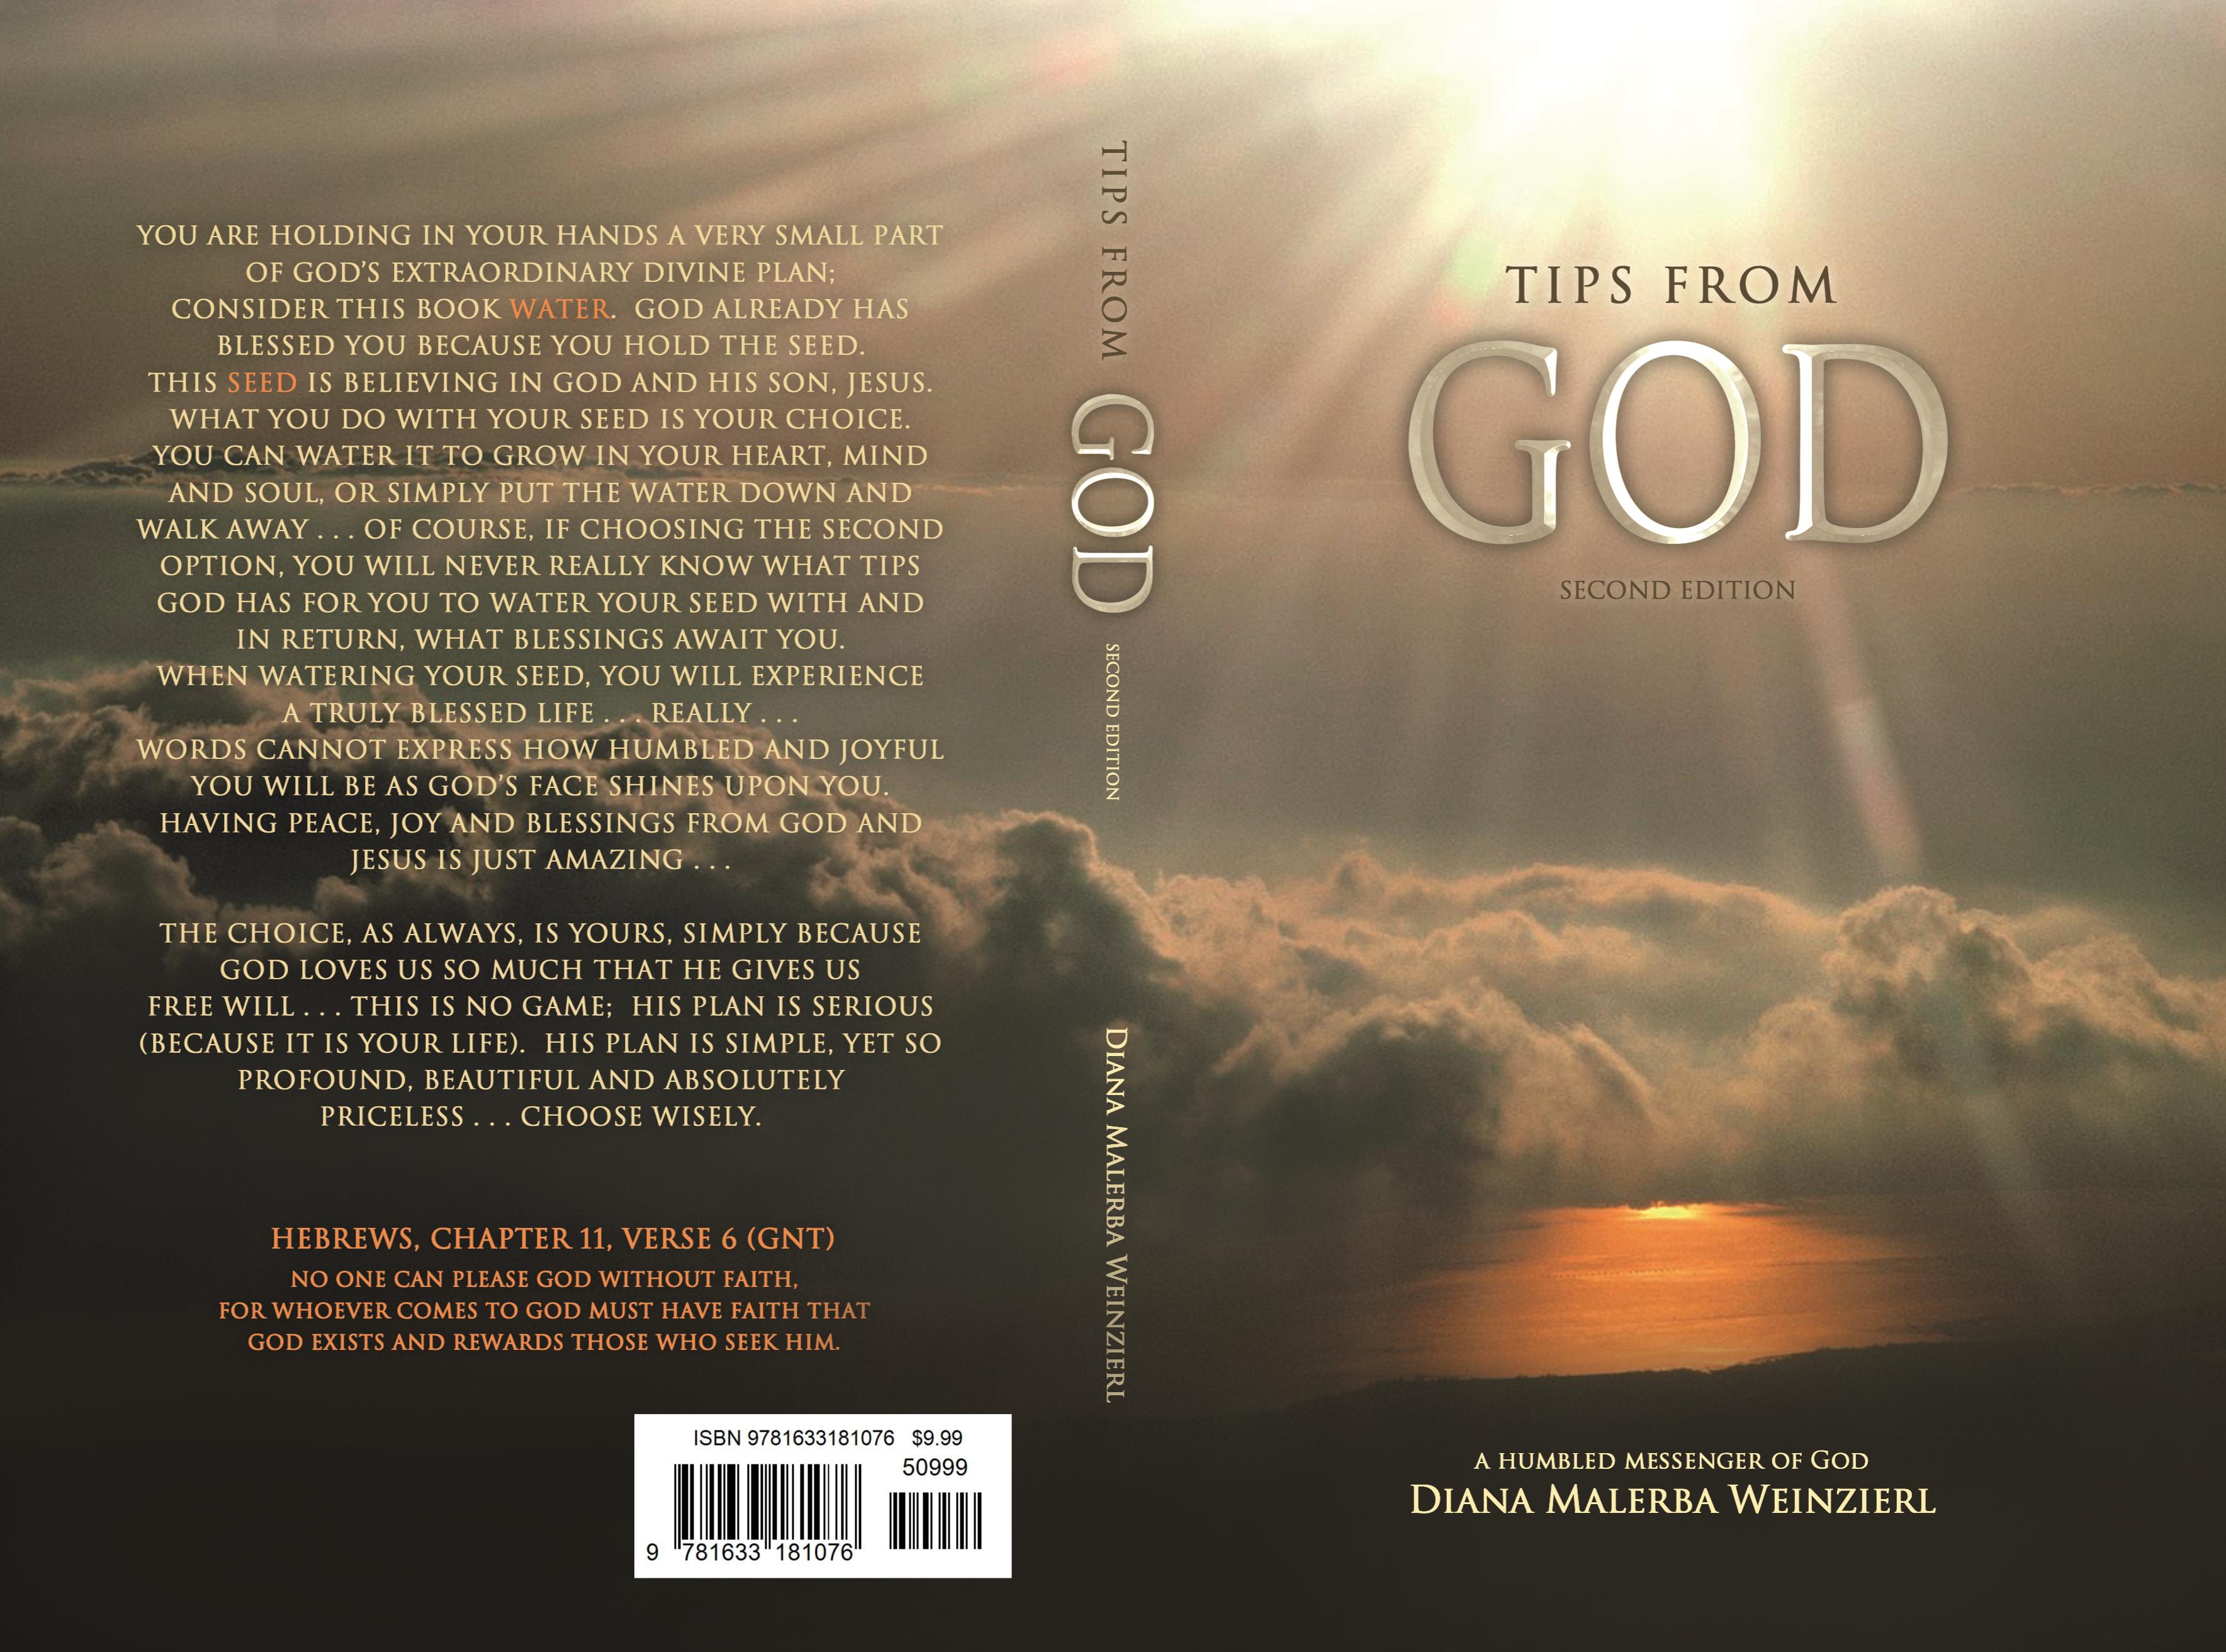 Tips from God, Second Edition cover image